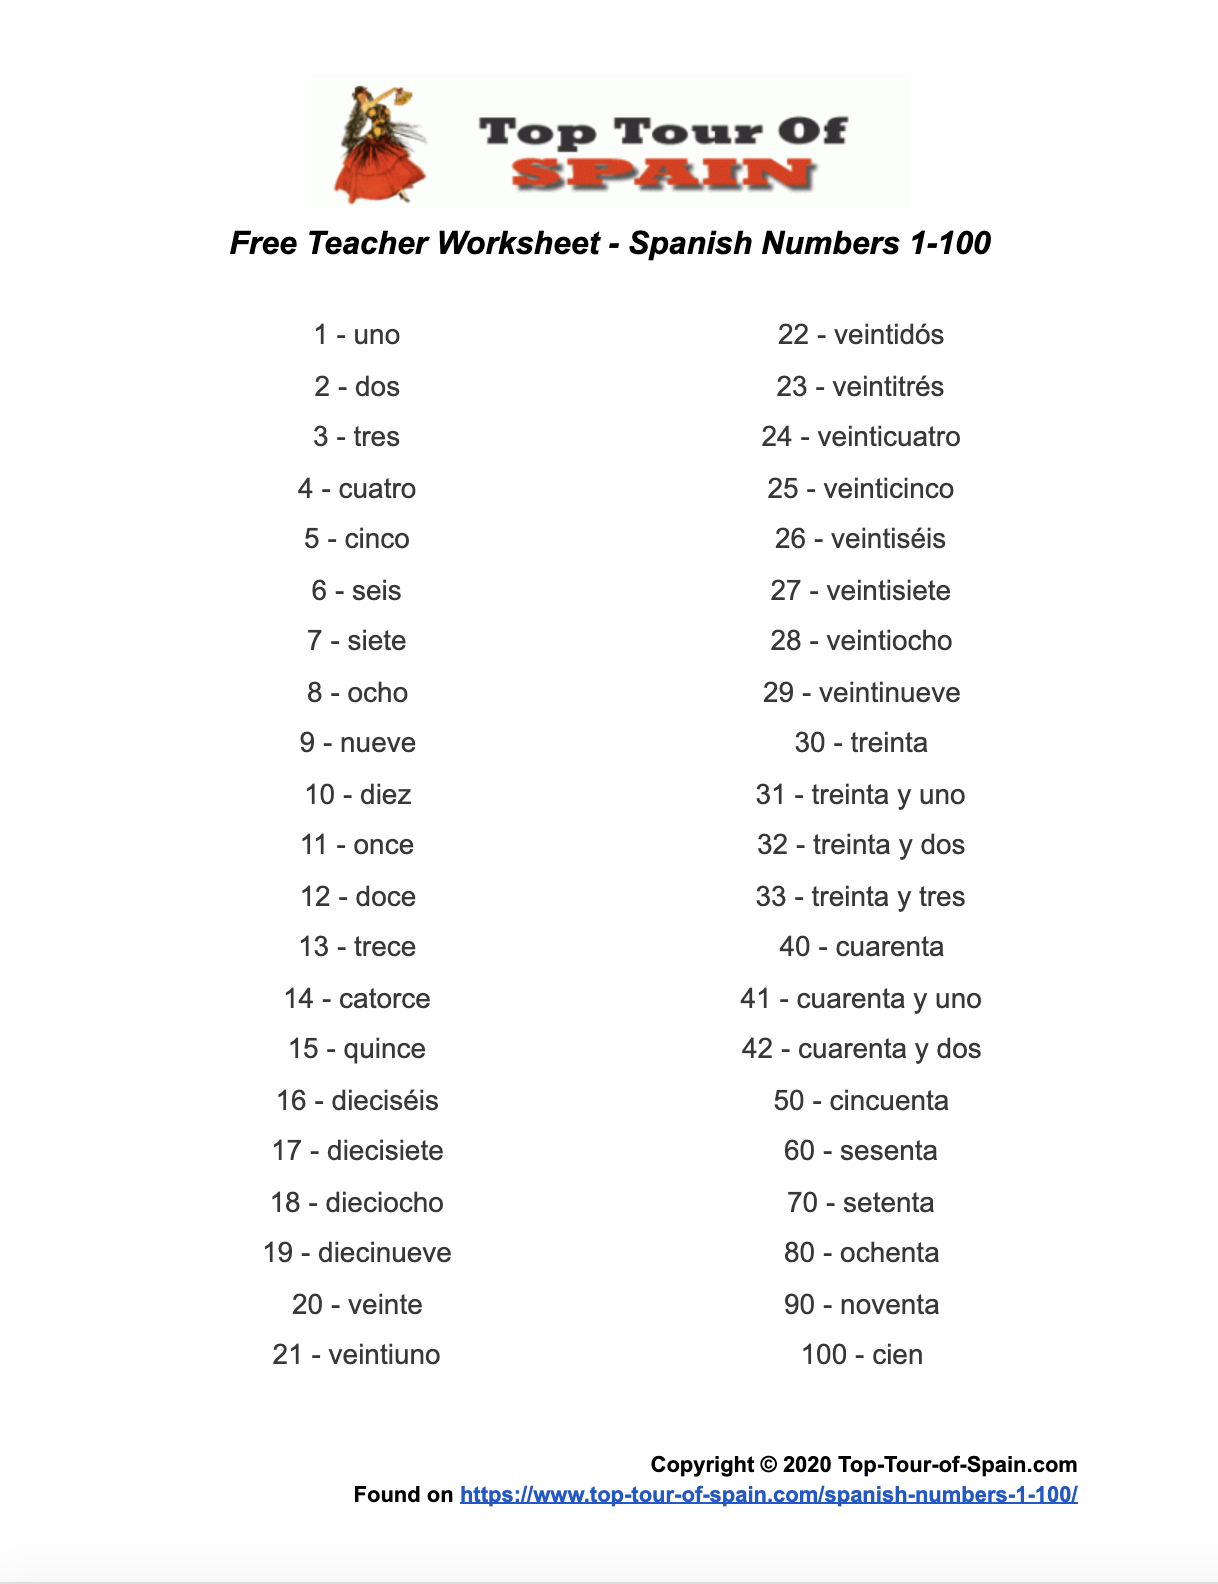 spanish-numbers-learn-numbers-in-spanish-1-100-top-tour-of-spain